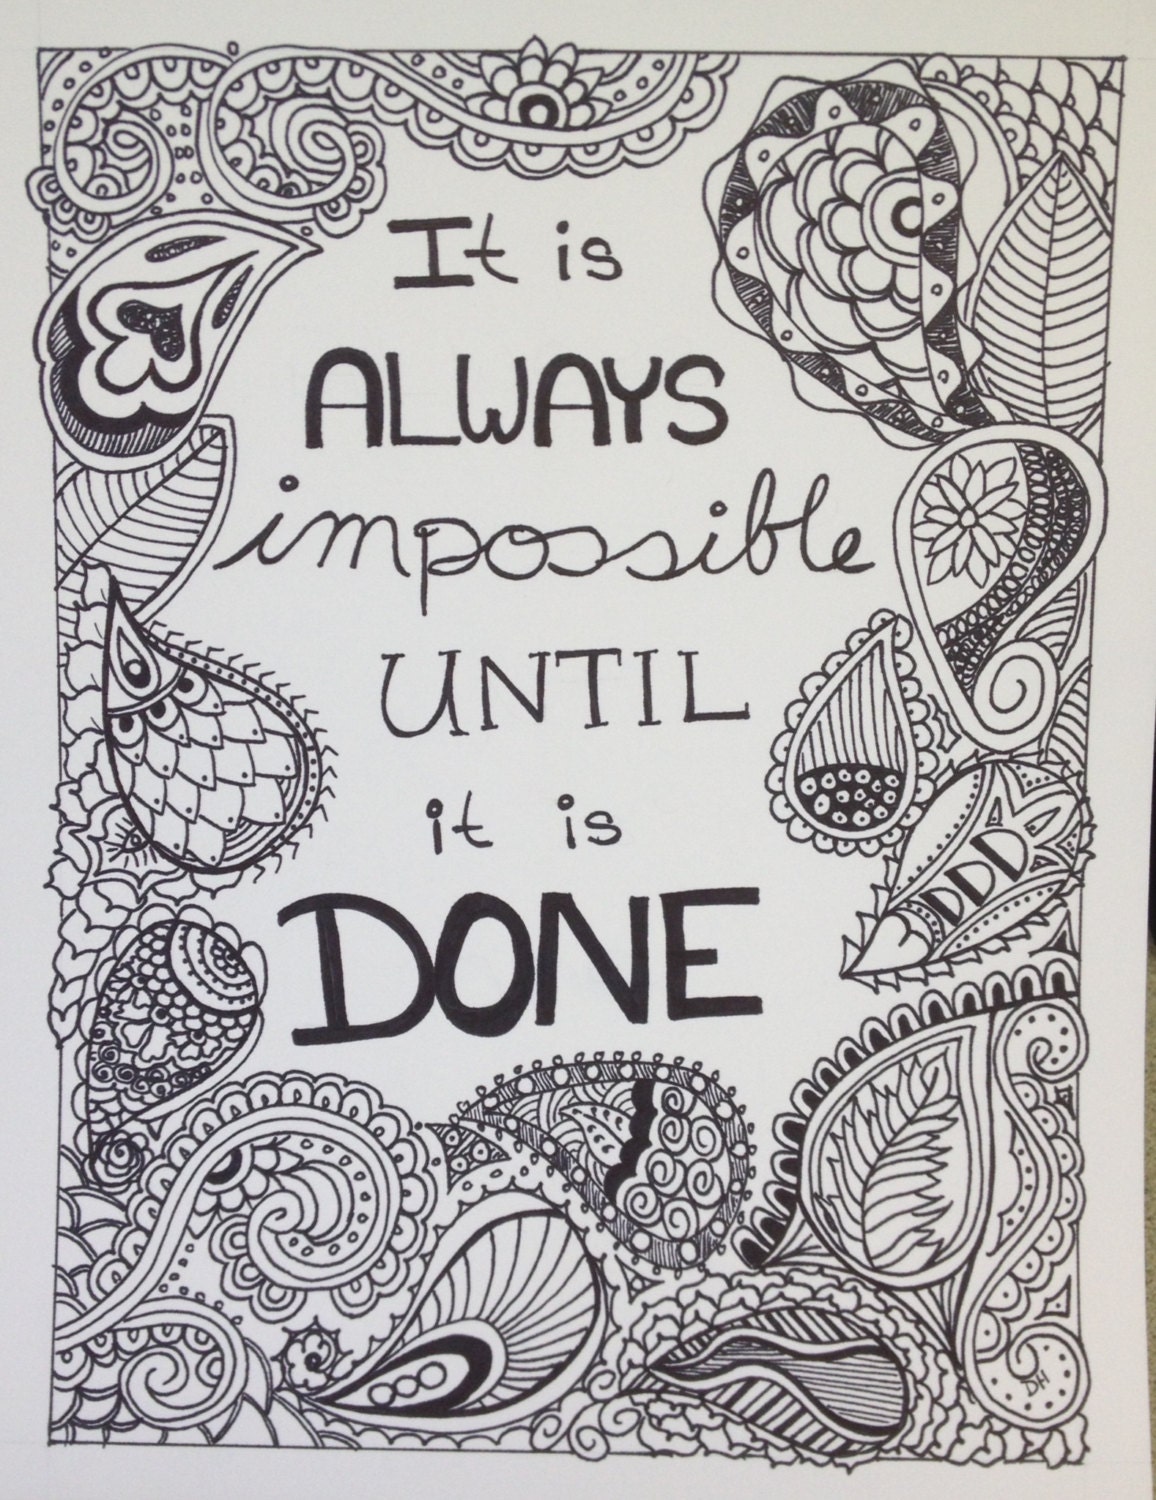 Motivational Doodle Art Impossible Until Done by StarBoundWestern